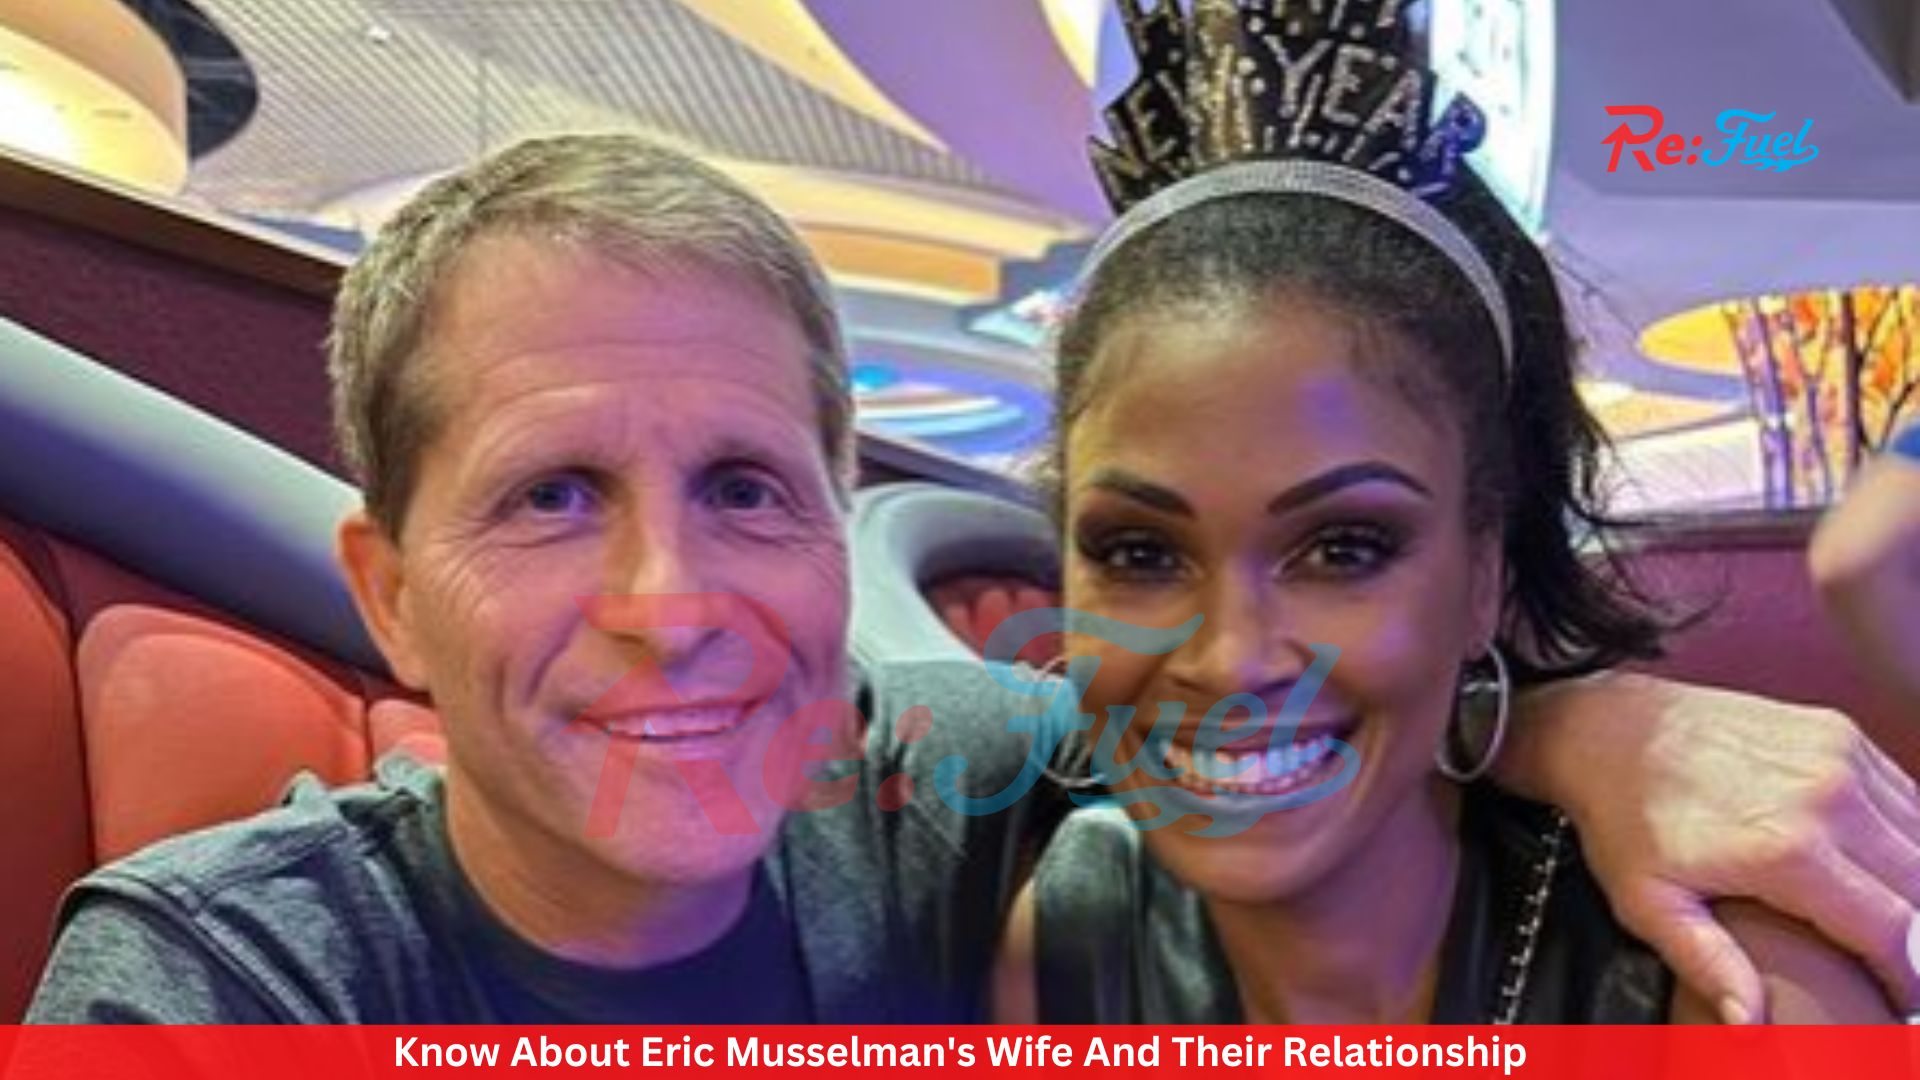 Know About Eric Musselman's Wife And Their Relationship